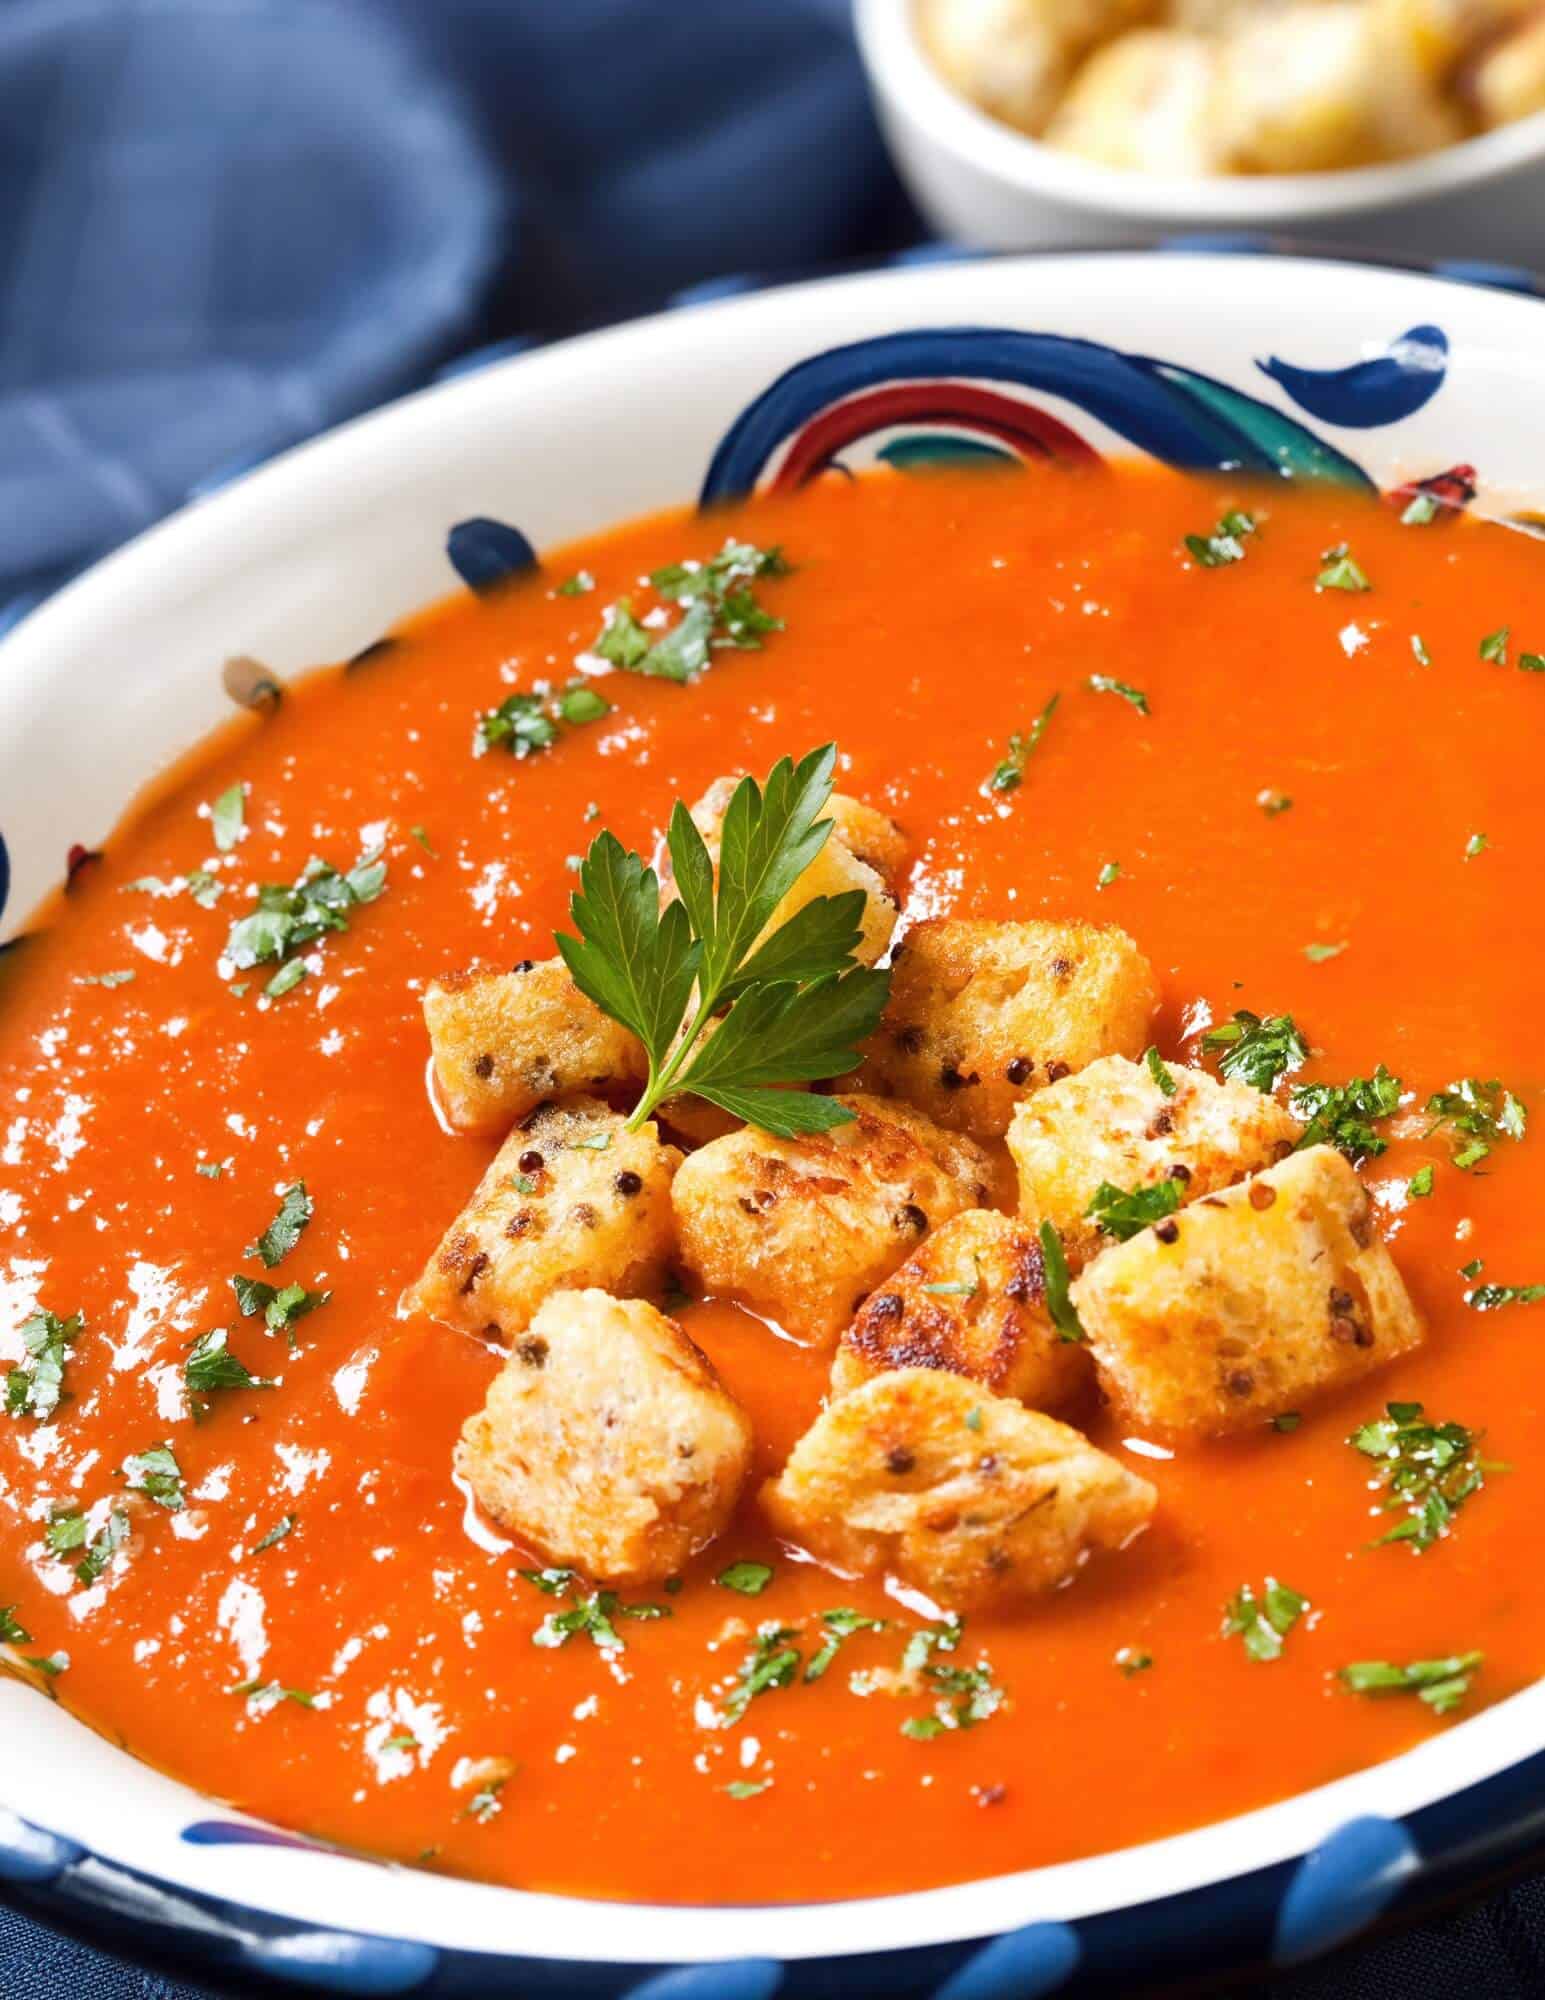 Creamy Roasted Garlic-Tomato Soup With Grilled Cheese Croutons